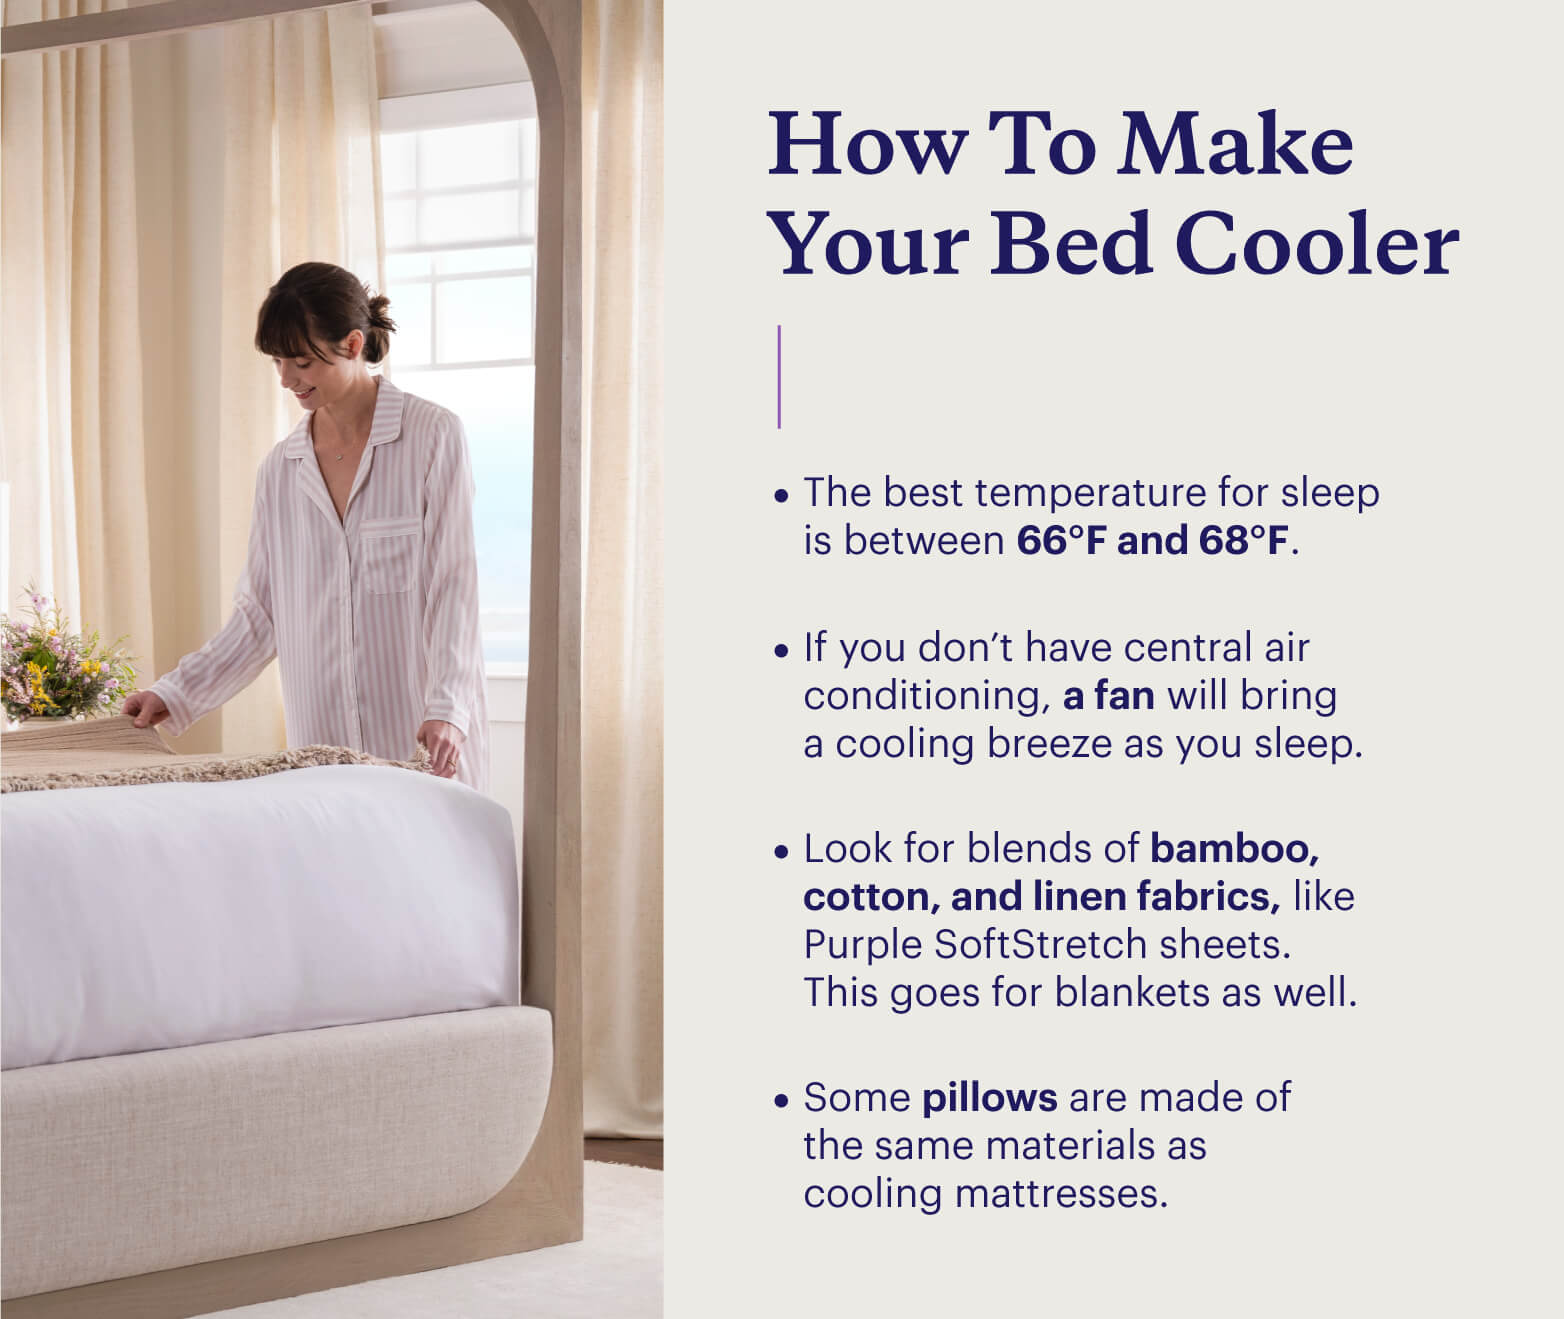 Find Comfort in Sleep With the Best Cooling Mattresses for Back